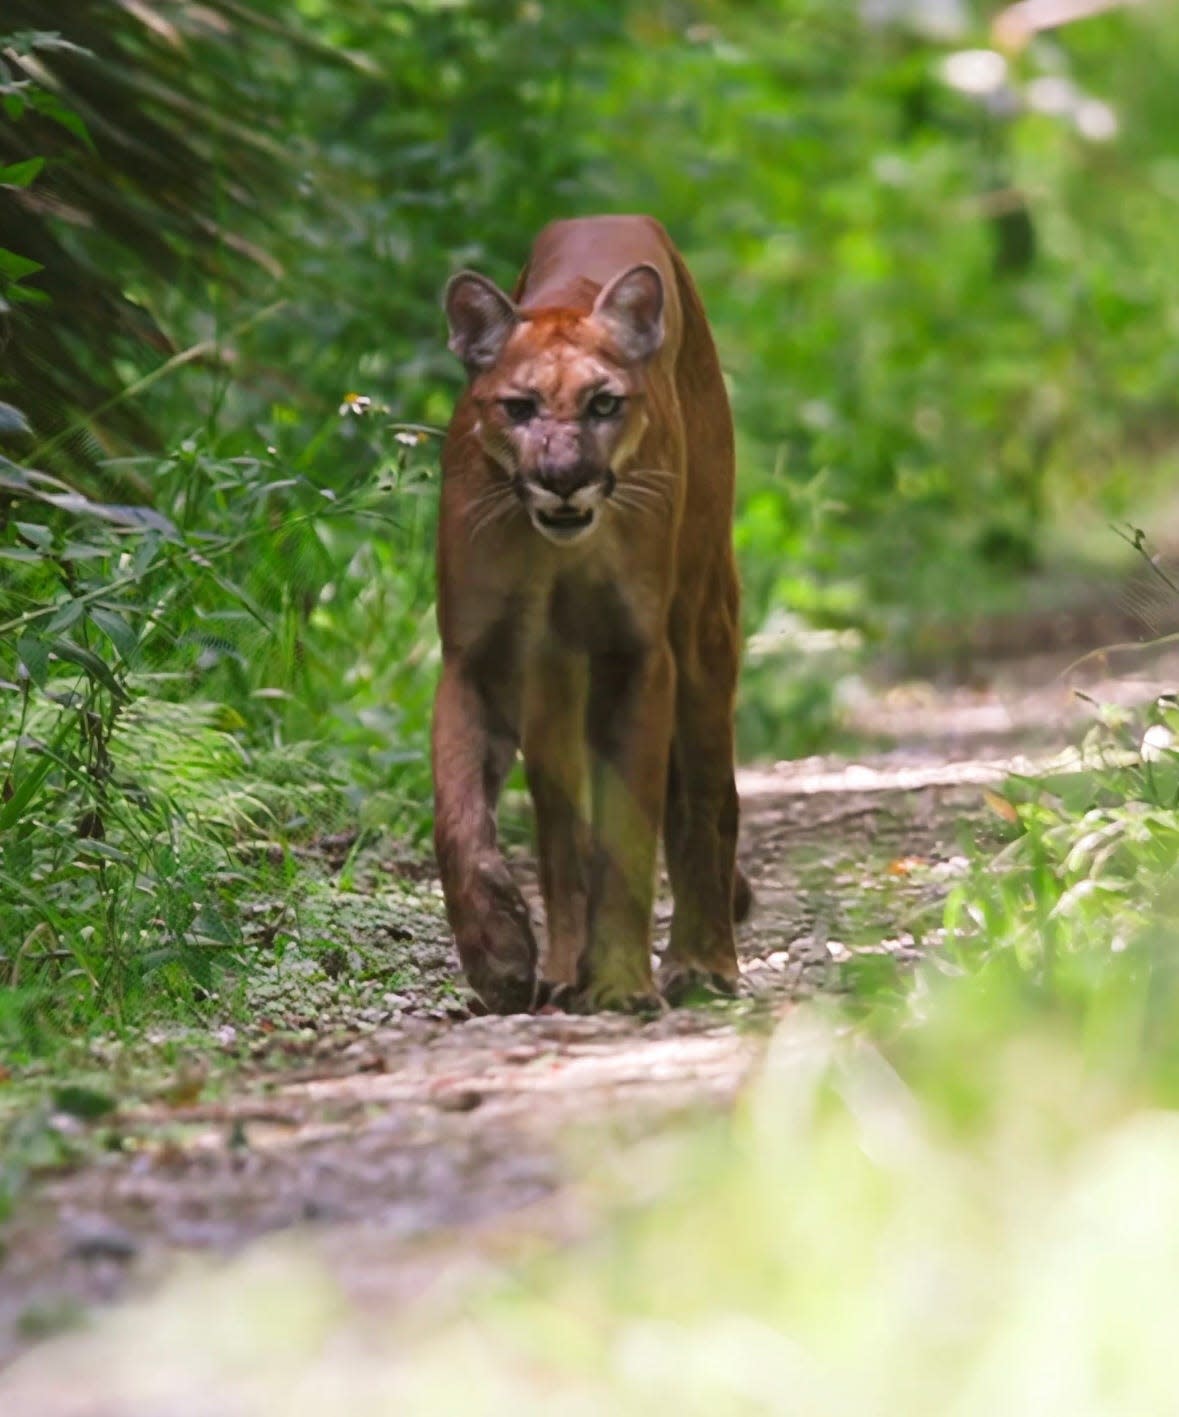 Florida Atlantic student Jacob Askin's two-year quest to see a Florida panther came true when he came face-to-face with one of the state's big cats in September 2023.